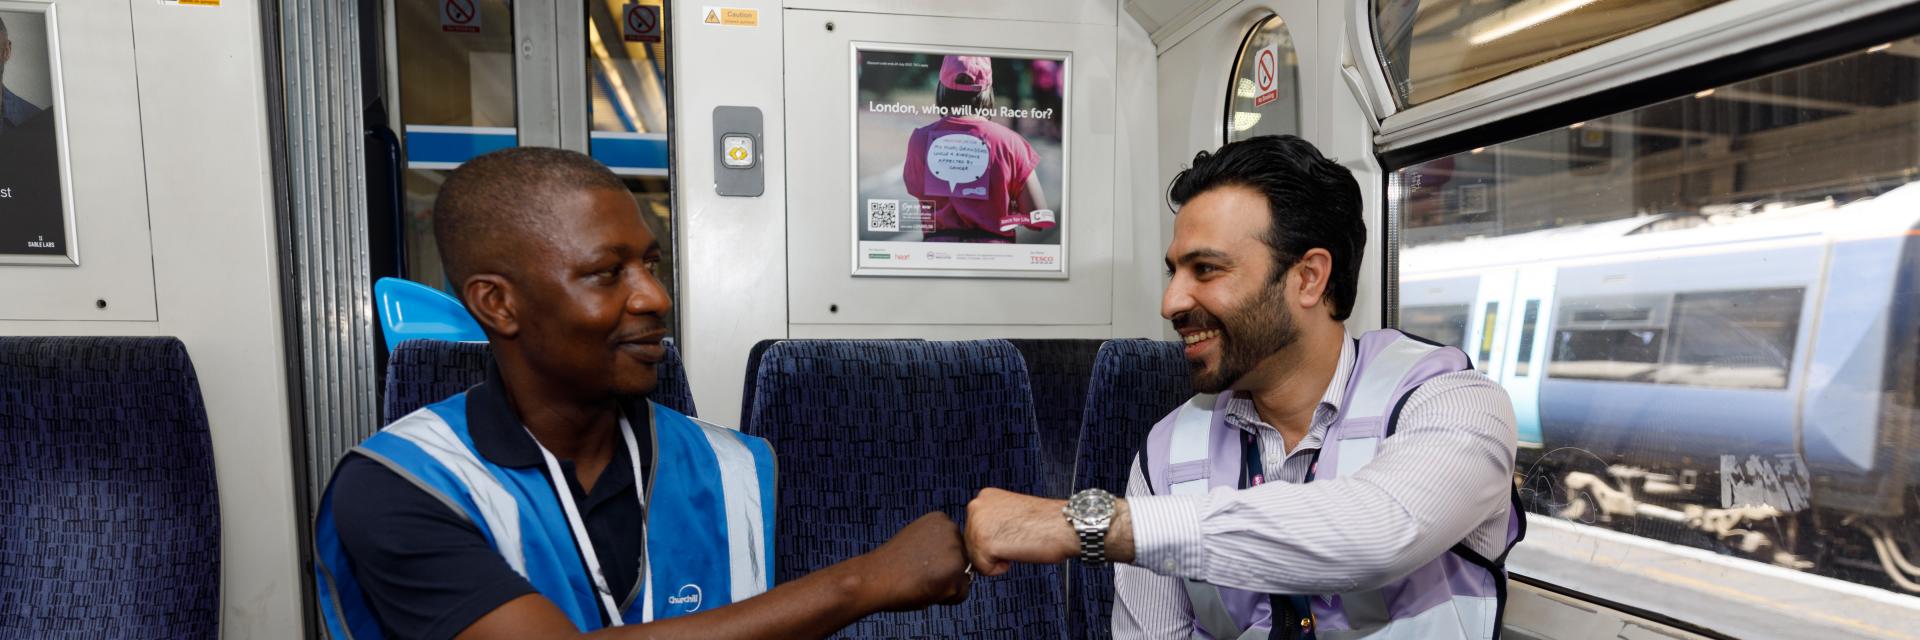 two rail workers sat on a train, fist bumping each other